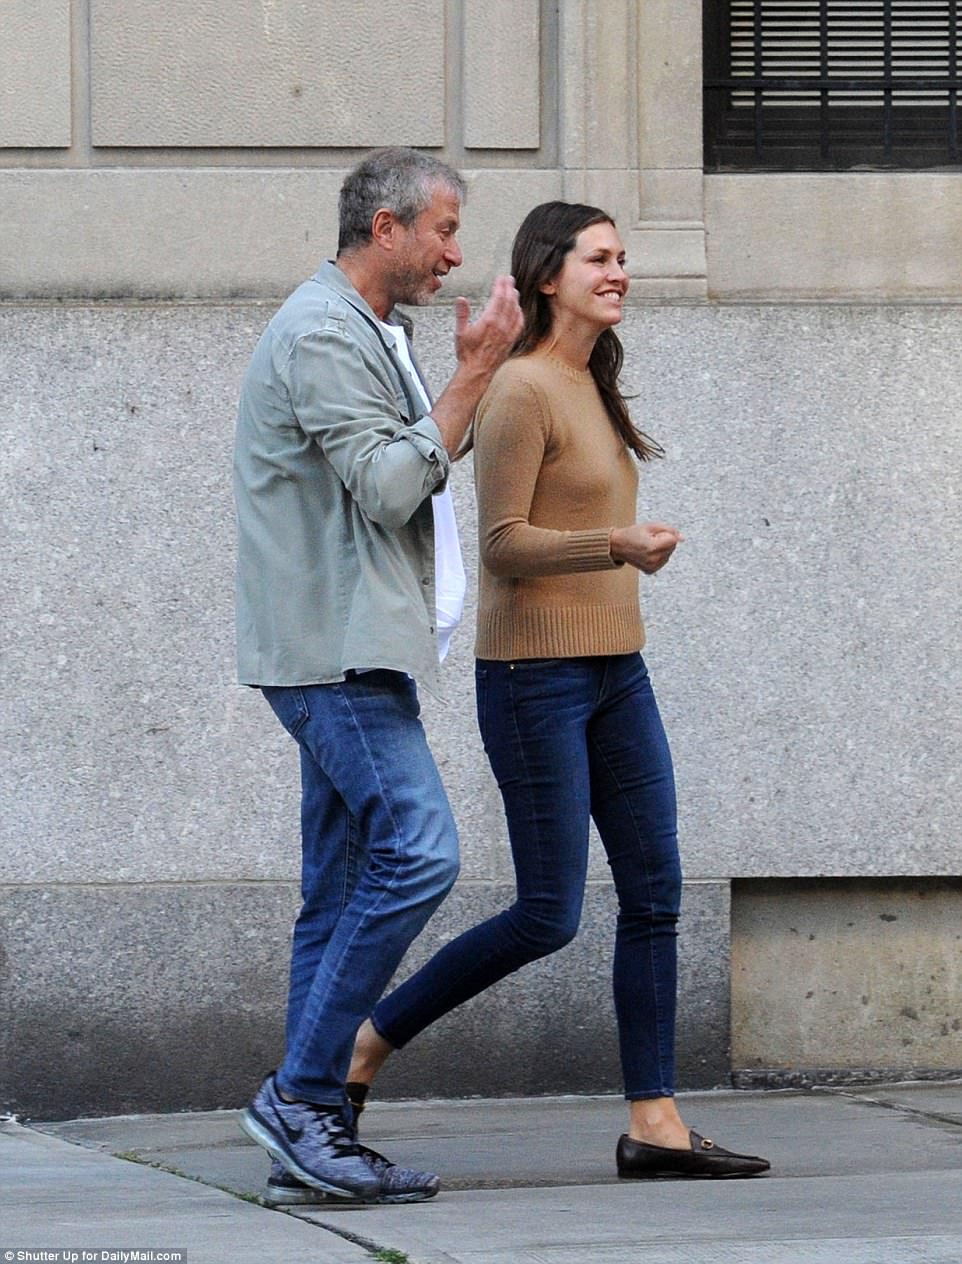 Abramovich and Zhukova have two young children and schools are starting in New York City, where Zhukova is living during the school year with the kids